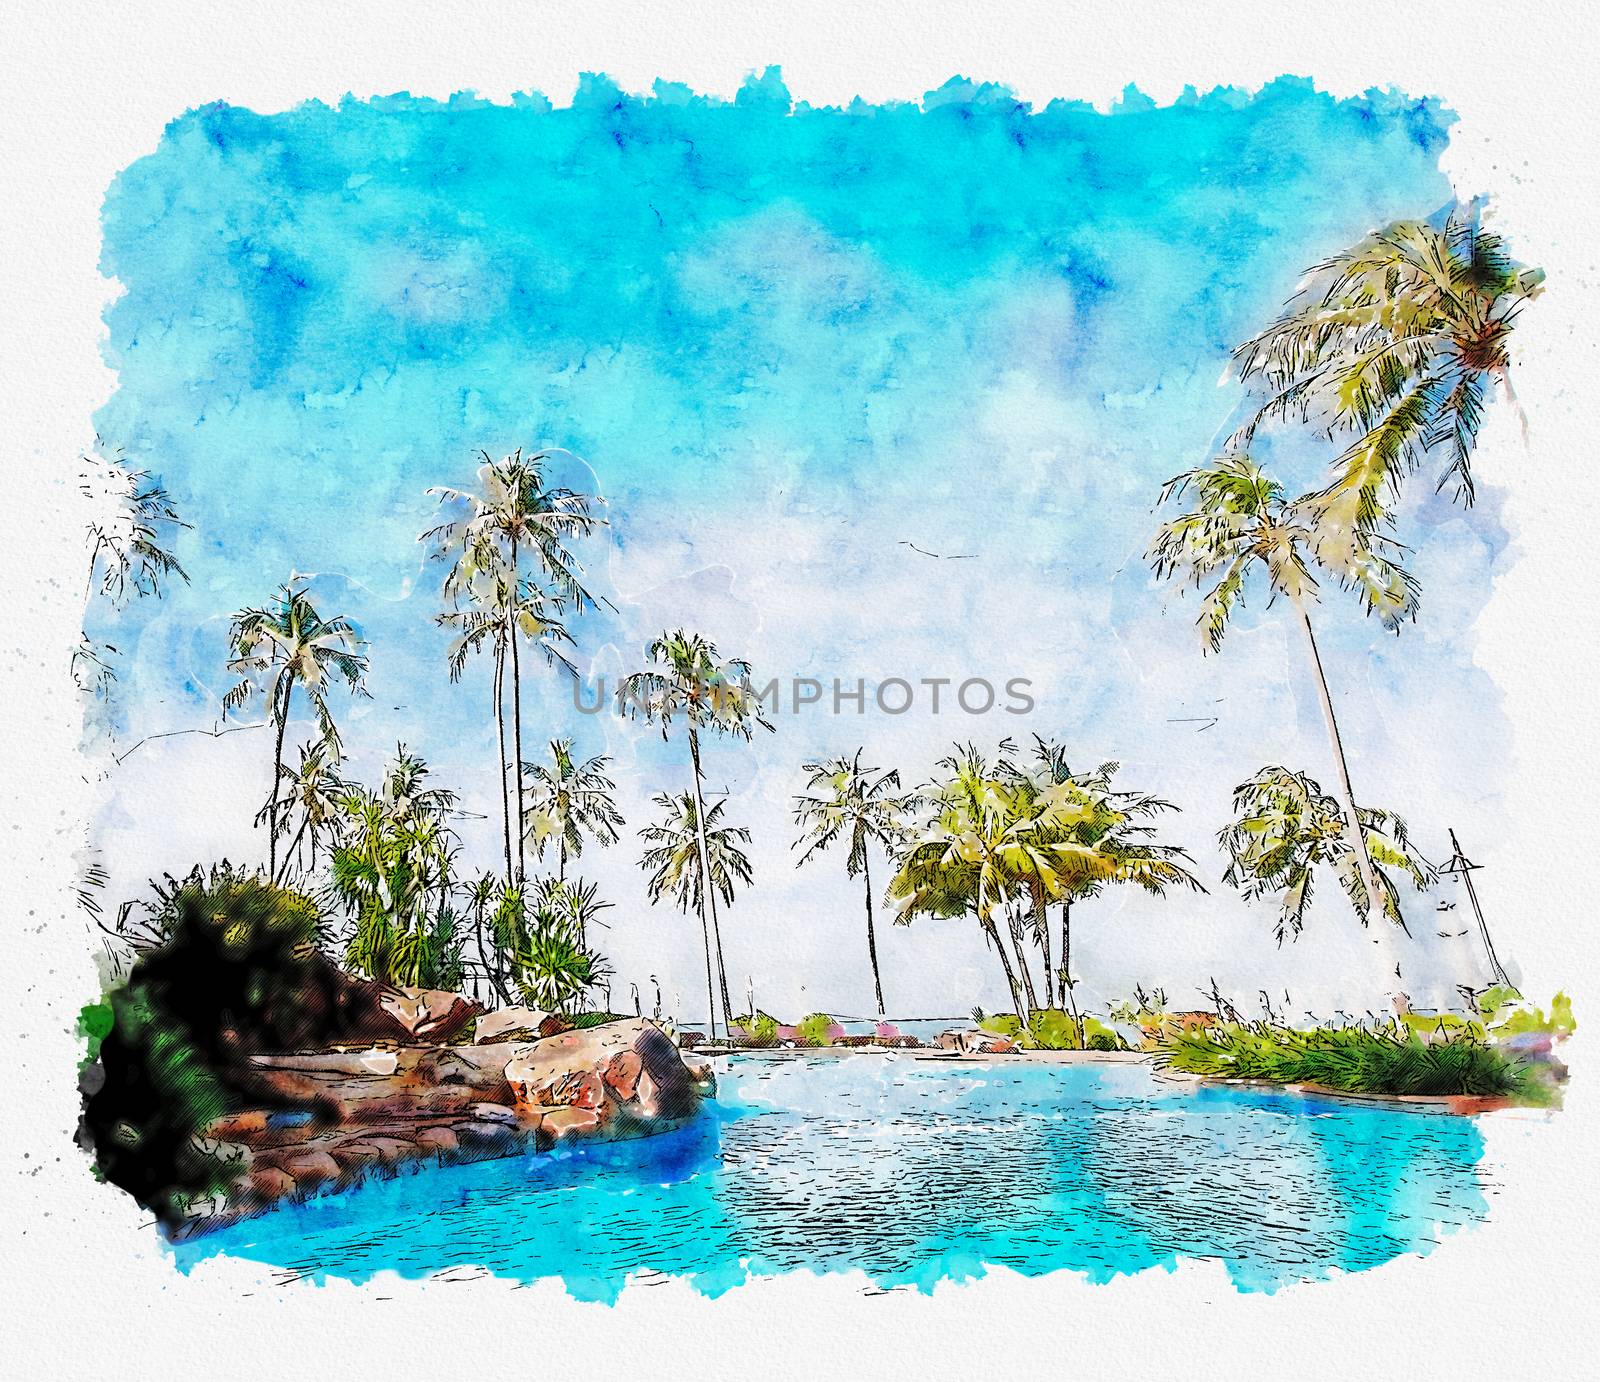 watercolor and illustration of tropical beach resort.